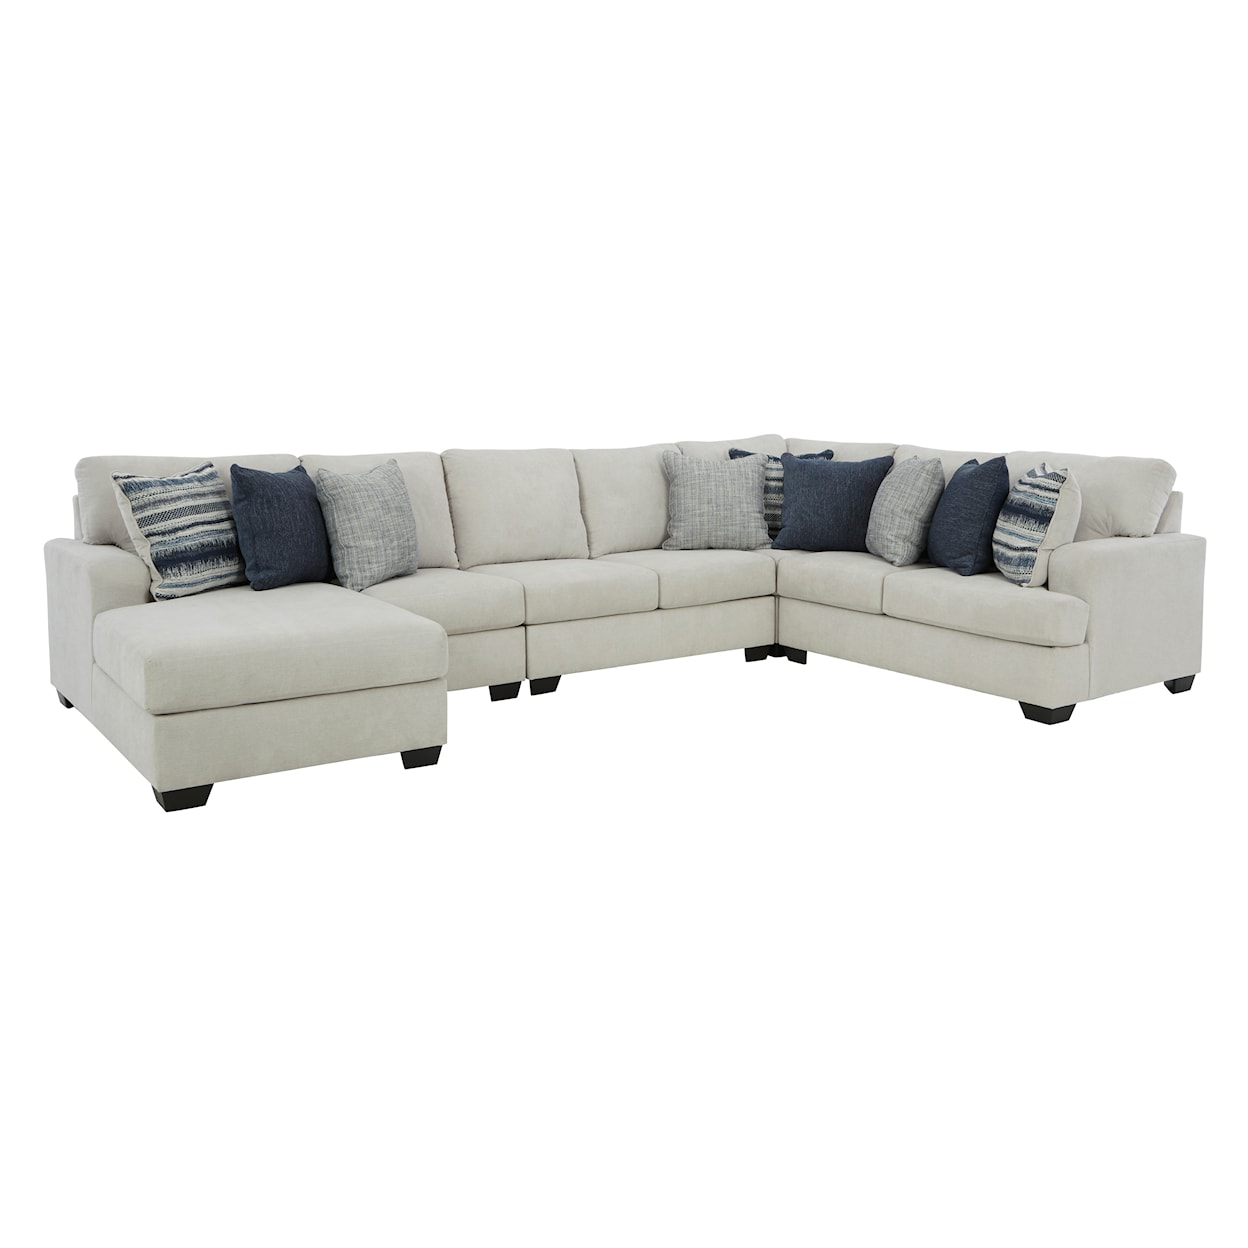 Benchcraft by Ashley Lowder 5-Piece Sectional with Chaise